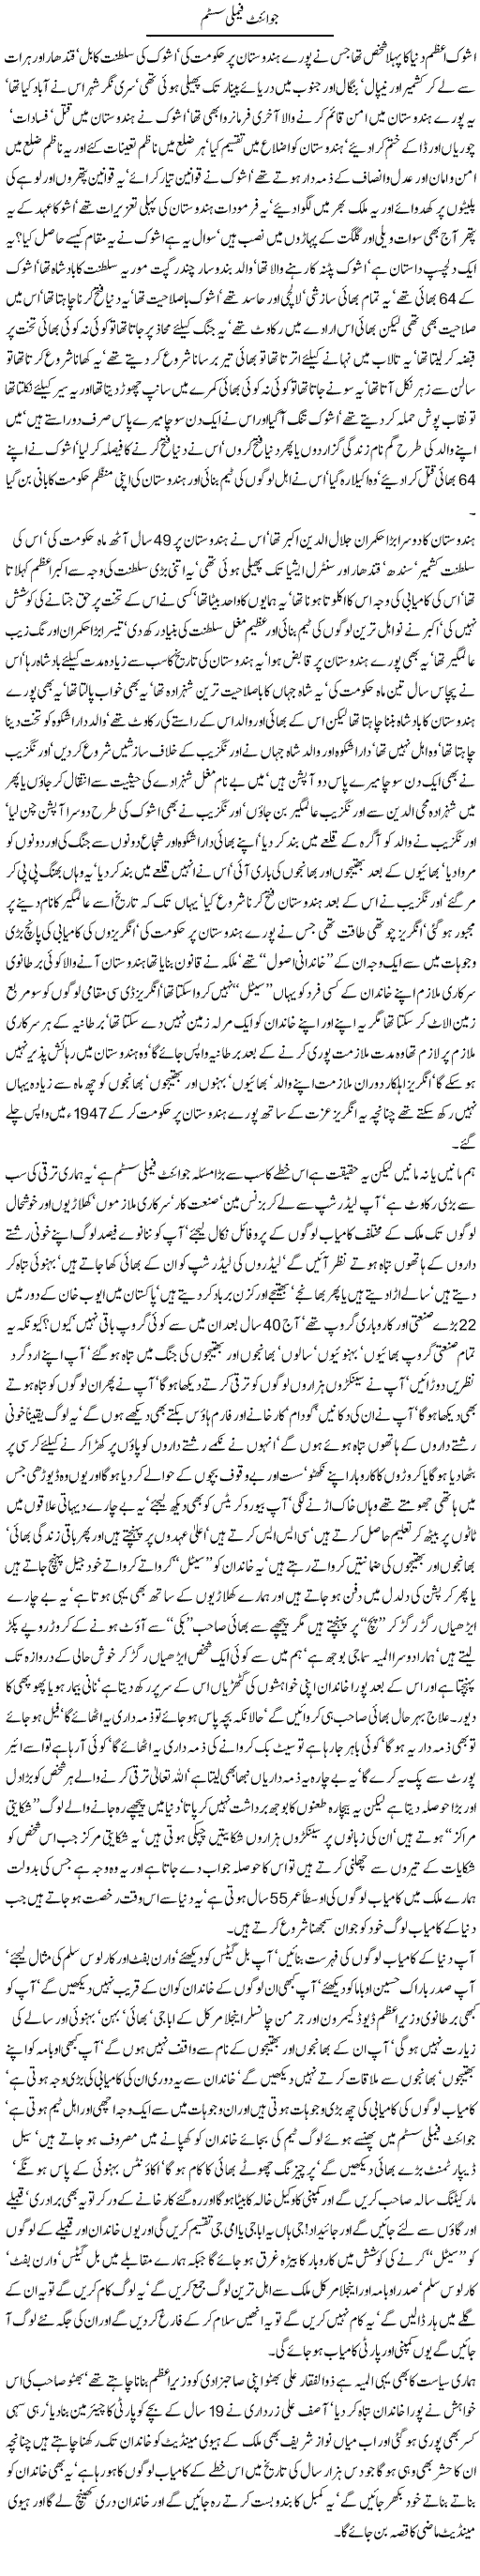 Joint Family system - Javed Chaudhry